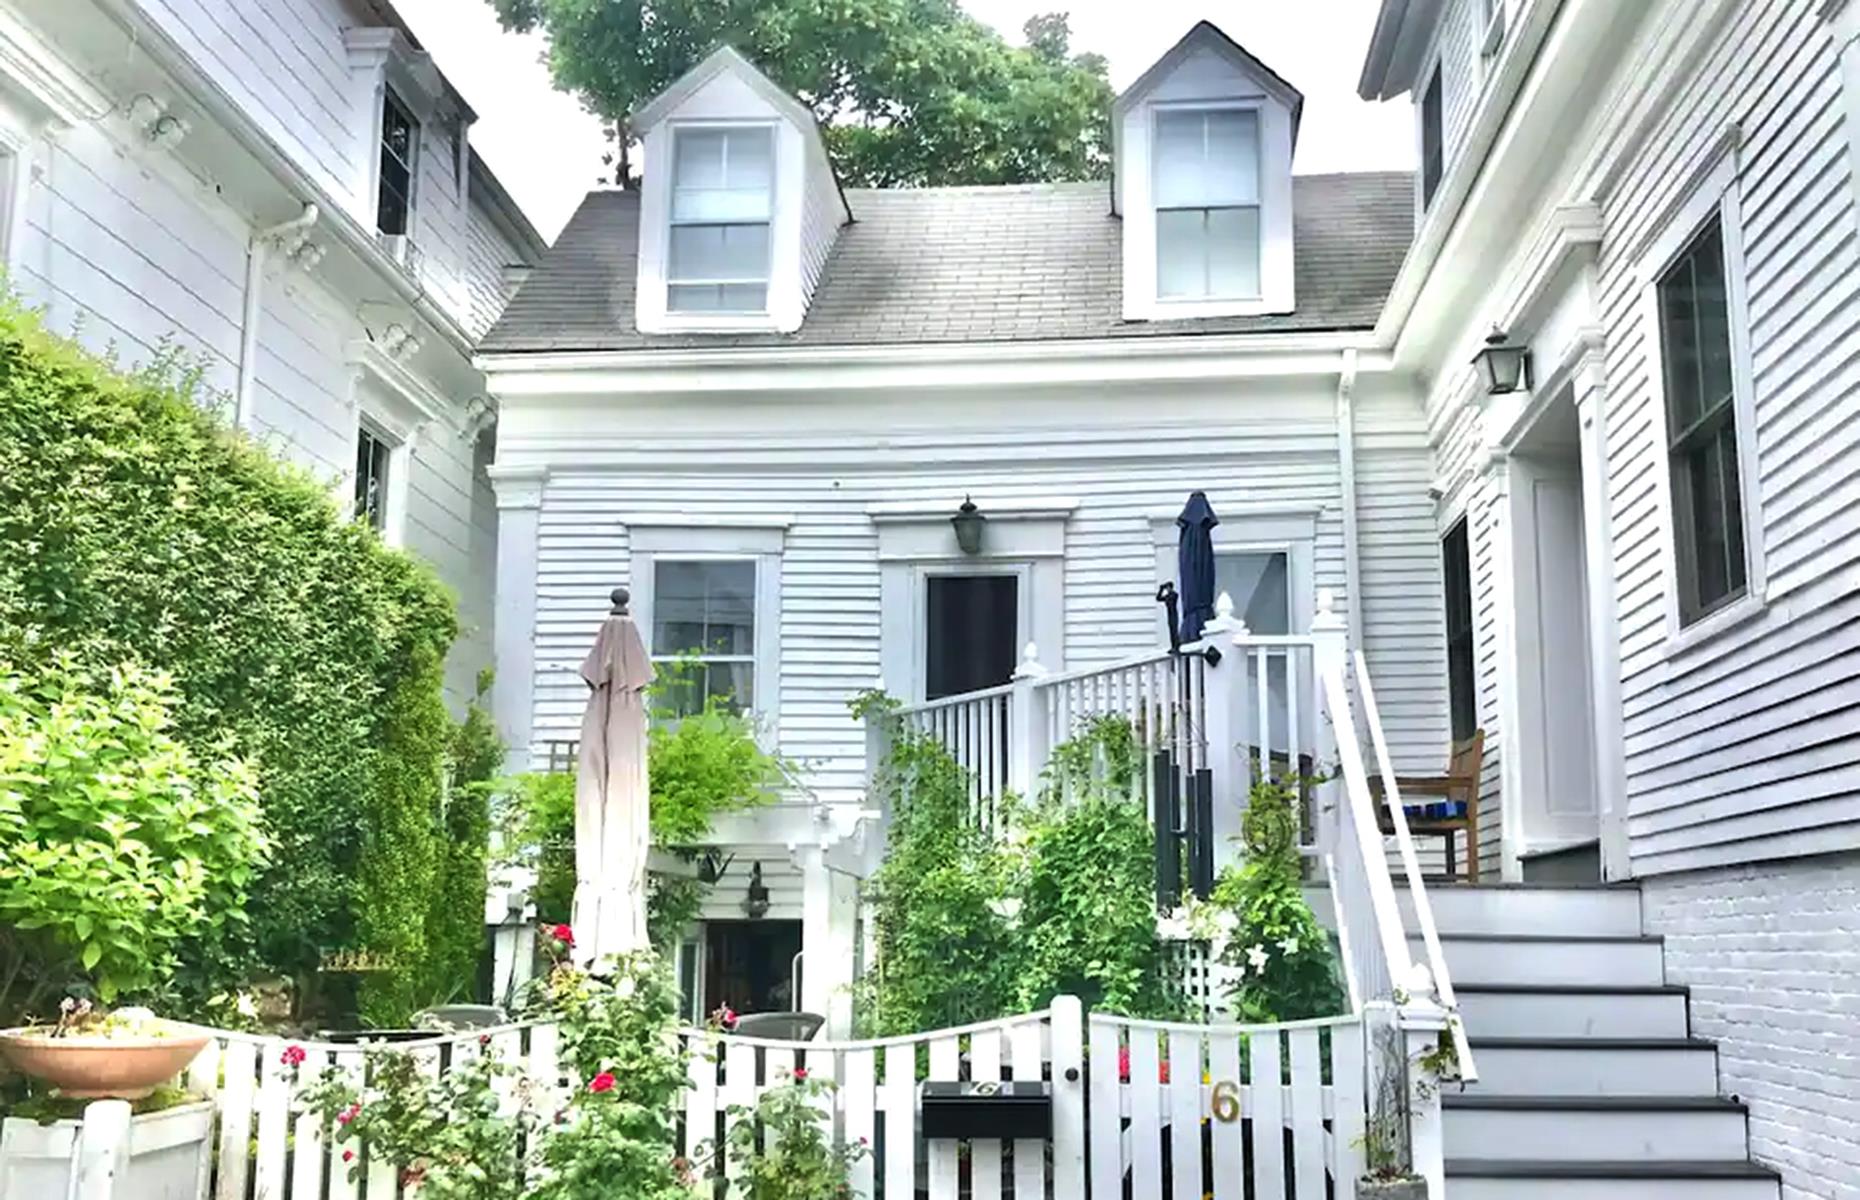 <p>The white-washed, clapboard exterior of <a href="https://www.airbnb.co.uk/rooms/52637126?adults=2&check_in=2023-01-23&source_impression_id=p3_1671553113_VFuYmFWEV92ISv9o&guests=1&check_out=2023-01-28">this apartment</a> charms from the get-go and once you're inside, you're greeted with bright rooms decked in calming blue tones (fitting for the location, which is a stone's throw from the water). It's set over two floors and is a convenient location from which to explore bohemian Provincetown, with its many arts spaces, indie shops and night spots. Prices start from $80 per night. </p>